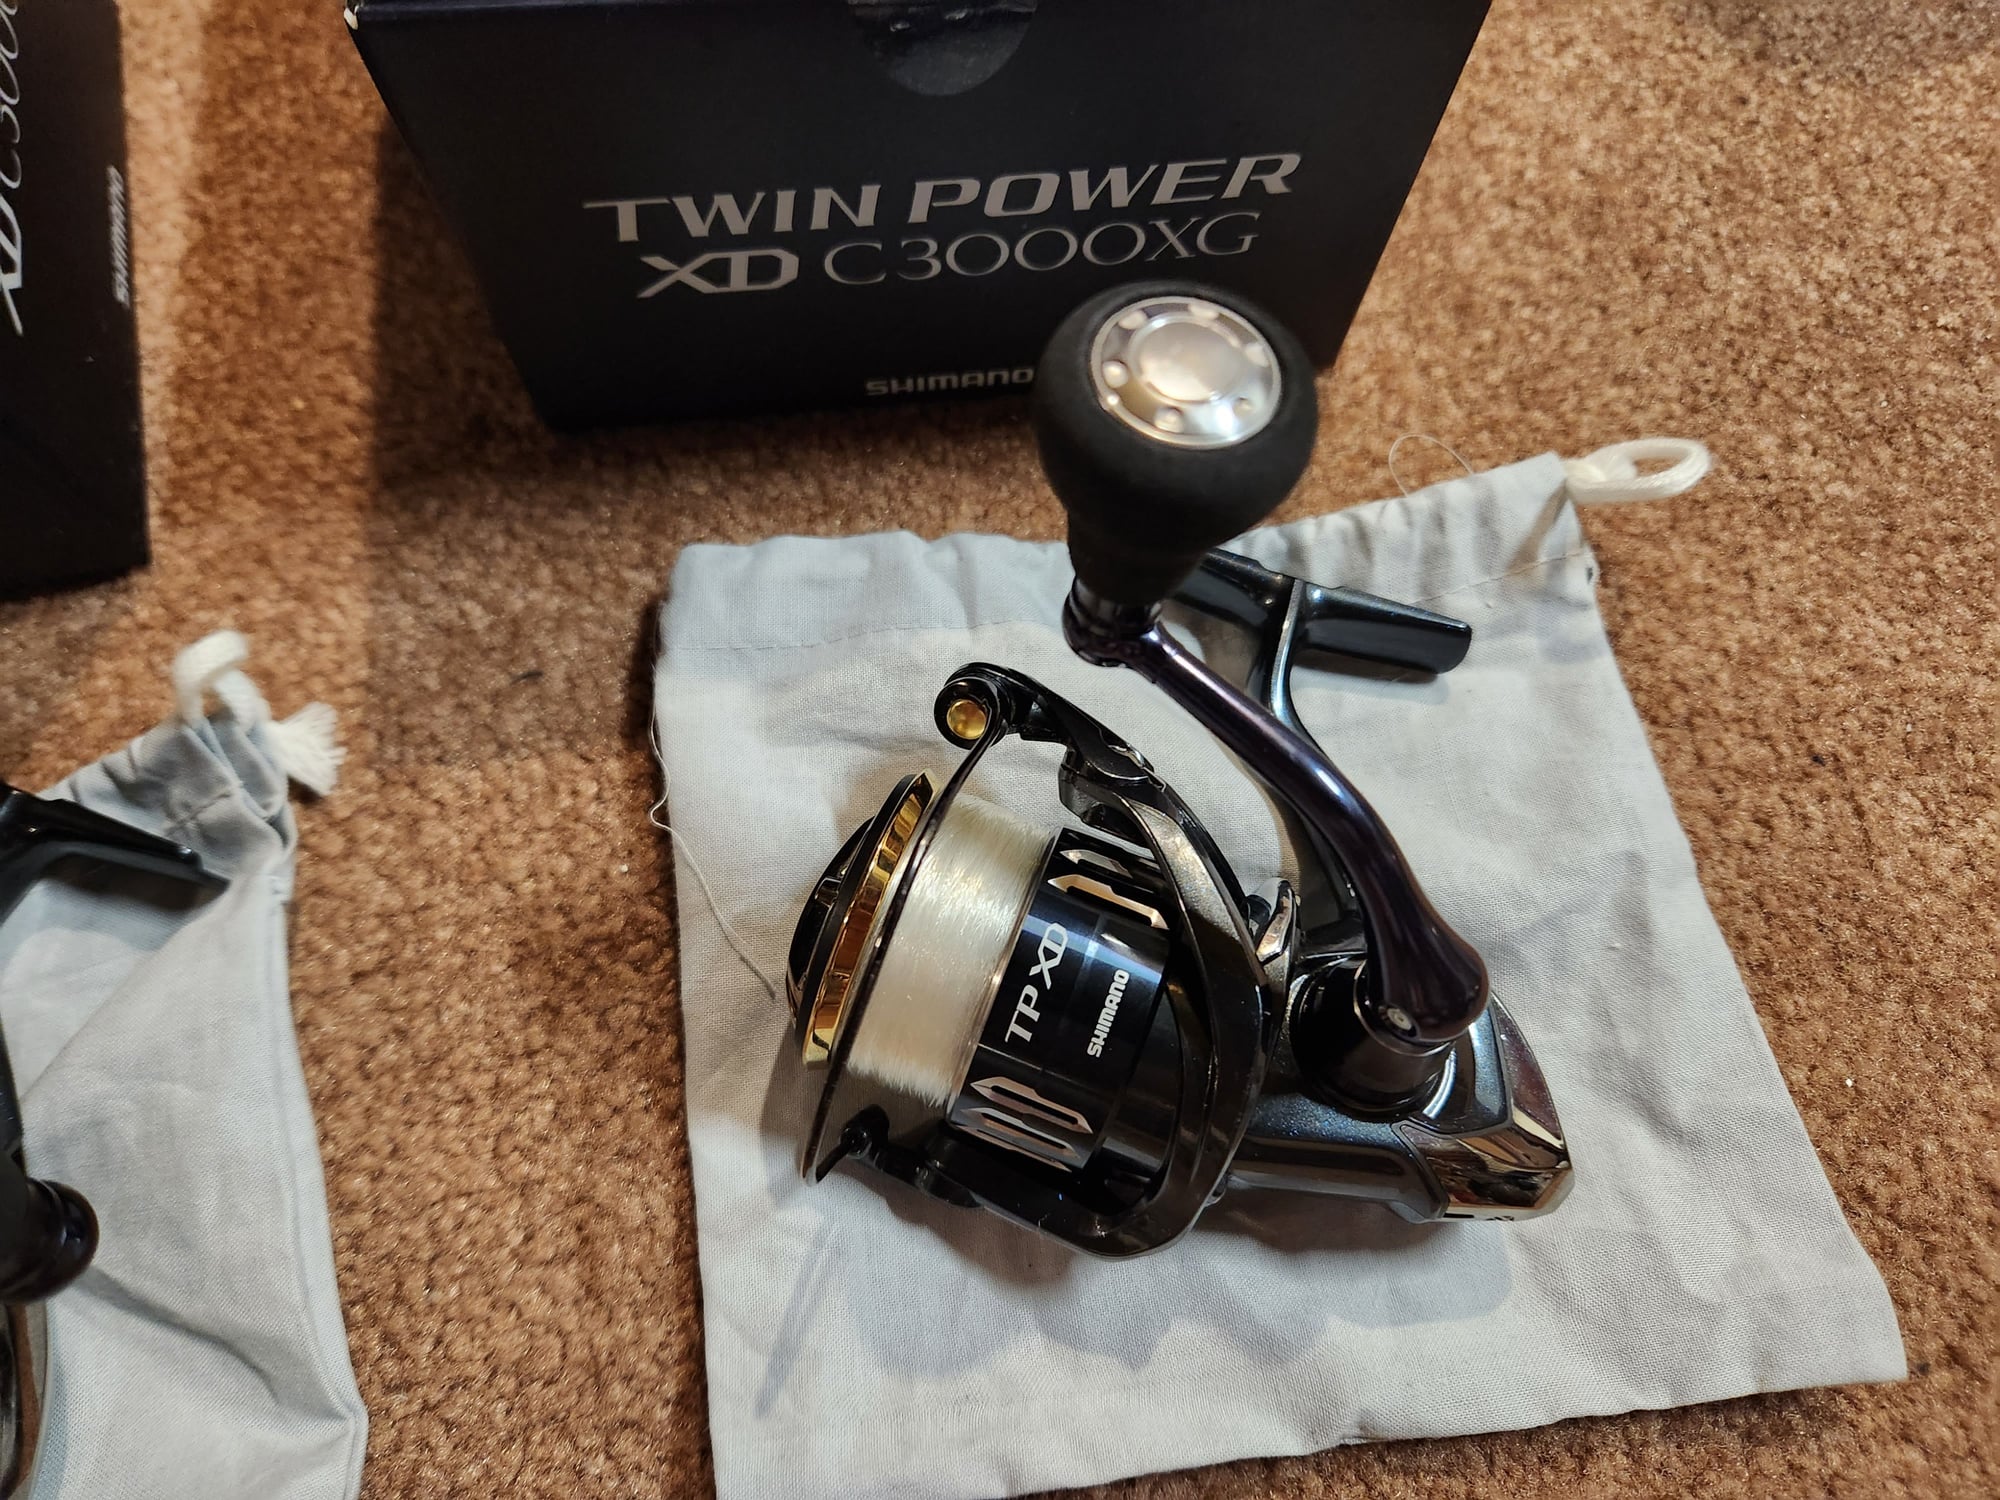 Shimano, Accurate reels, g loomis and Phenix rods - The Hull Truth -  Boating and Fishing Forum